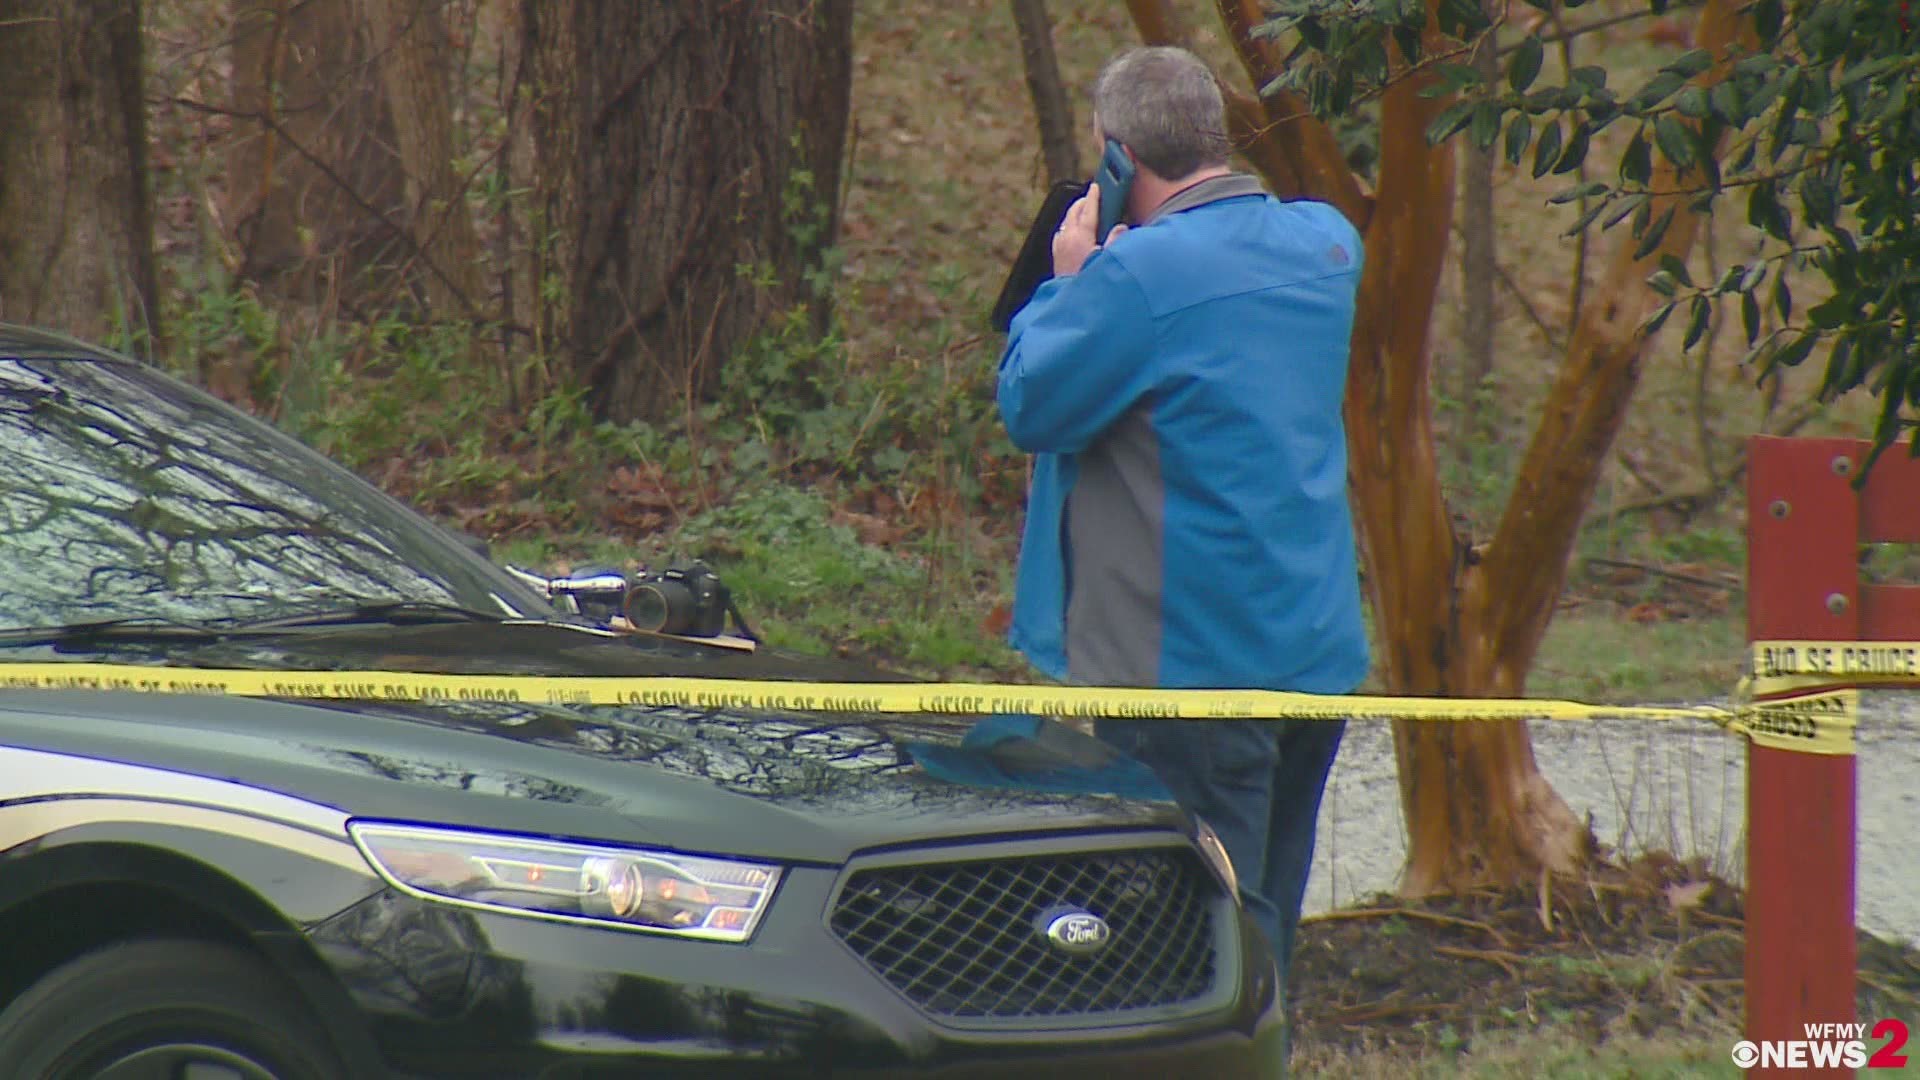 A body was found in the Guilford Hills neighborhood in Greensboro Monday morning.